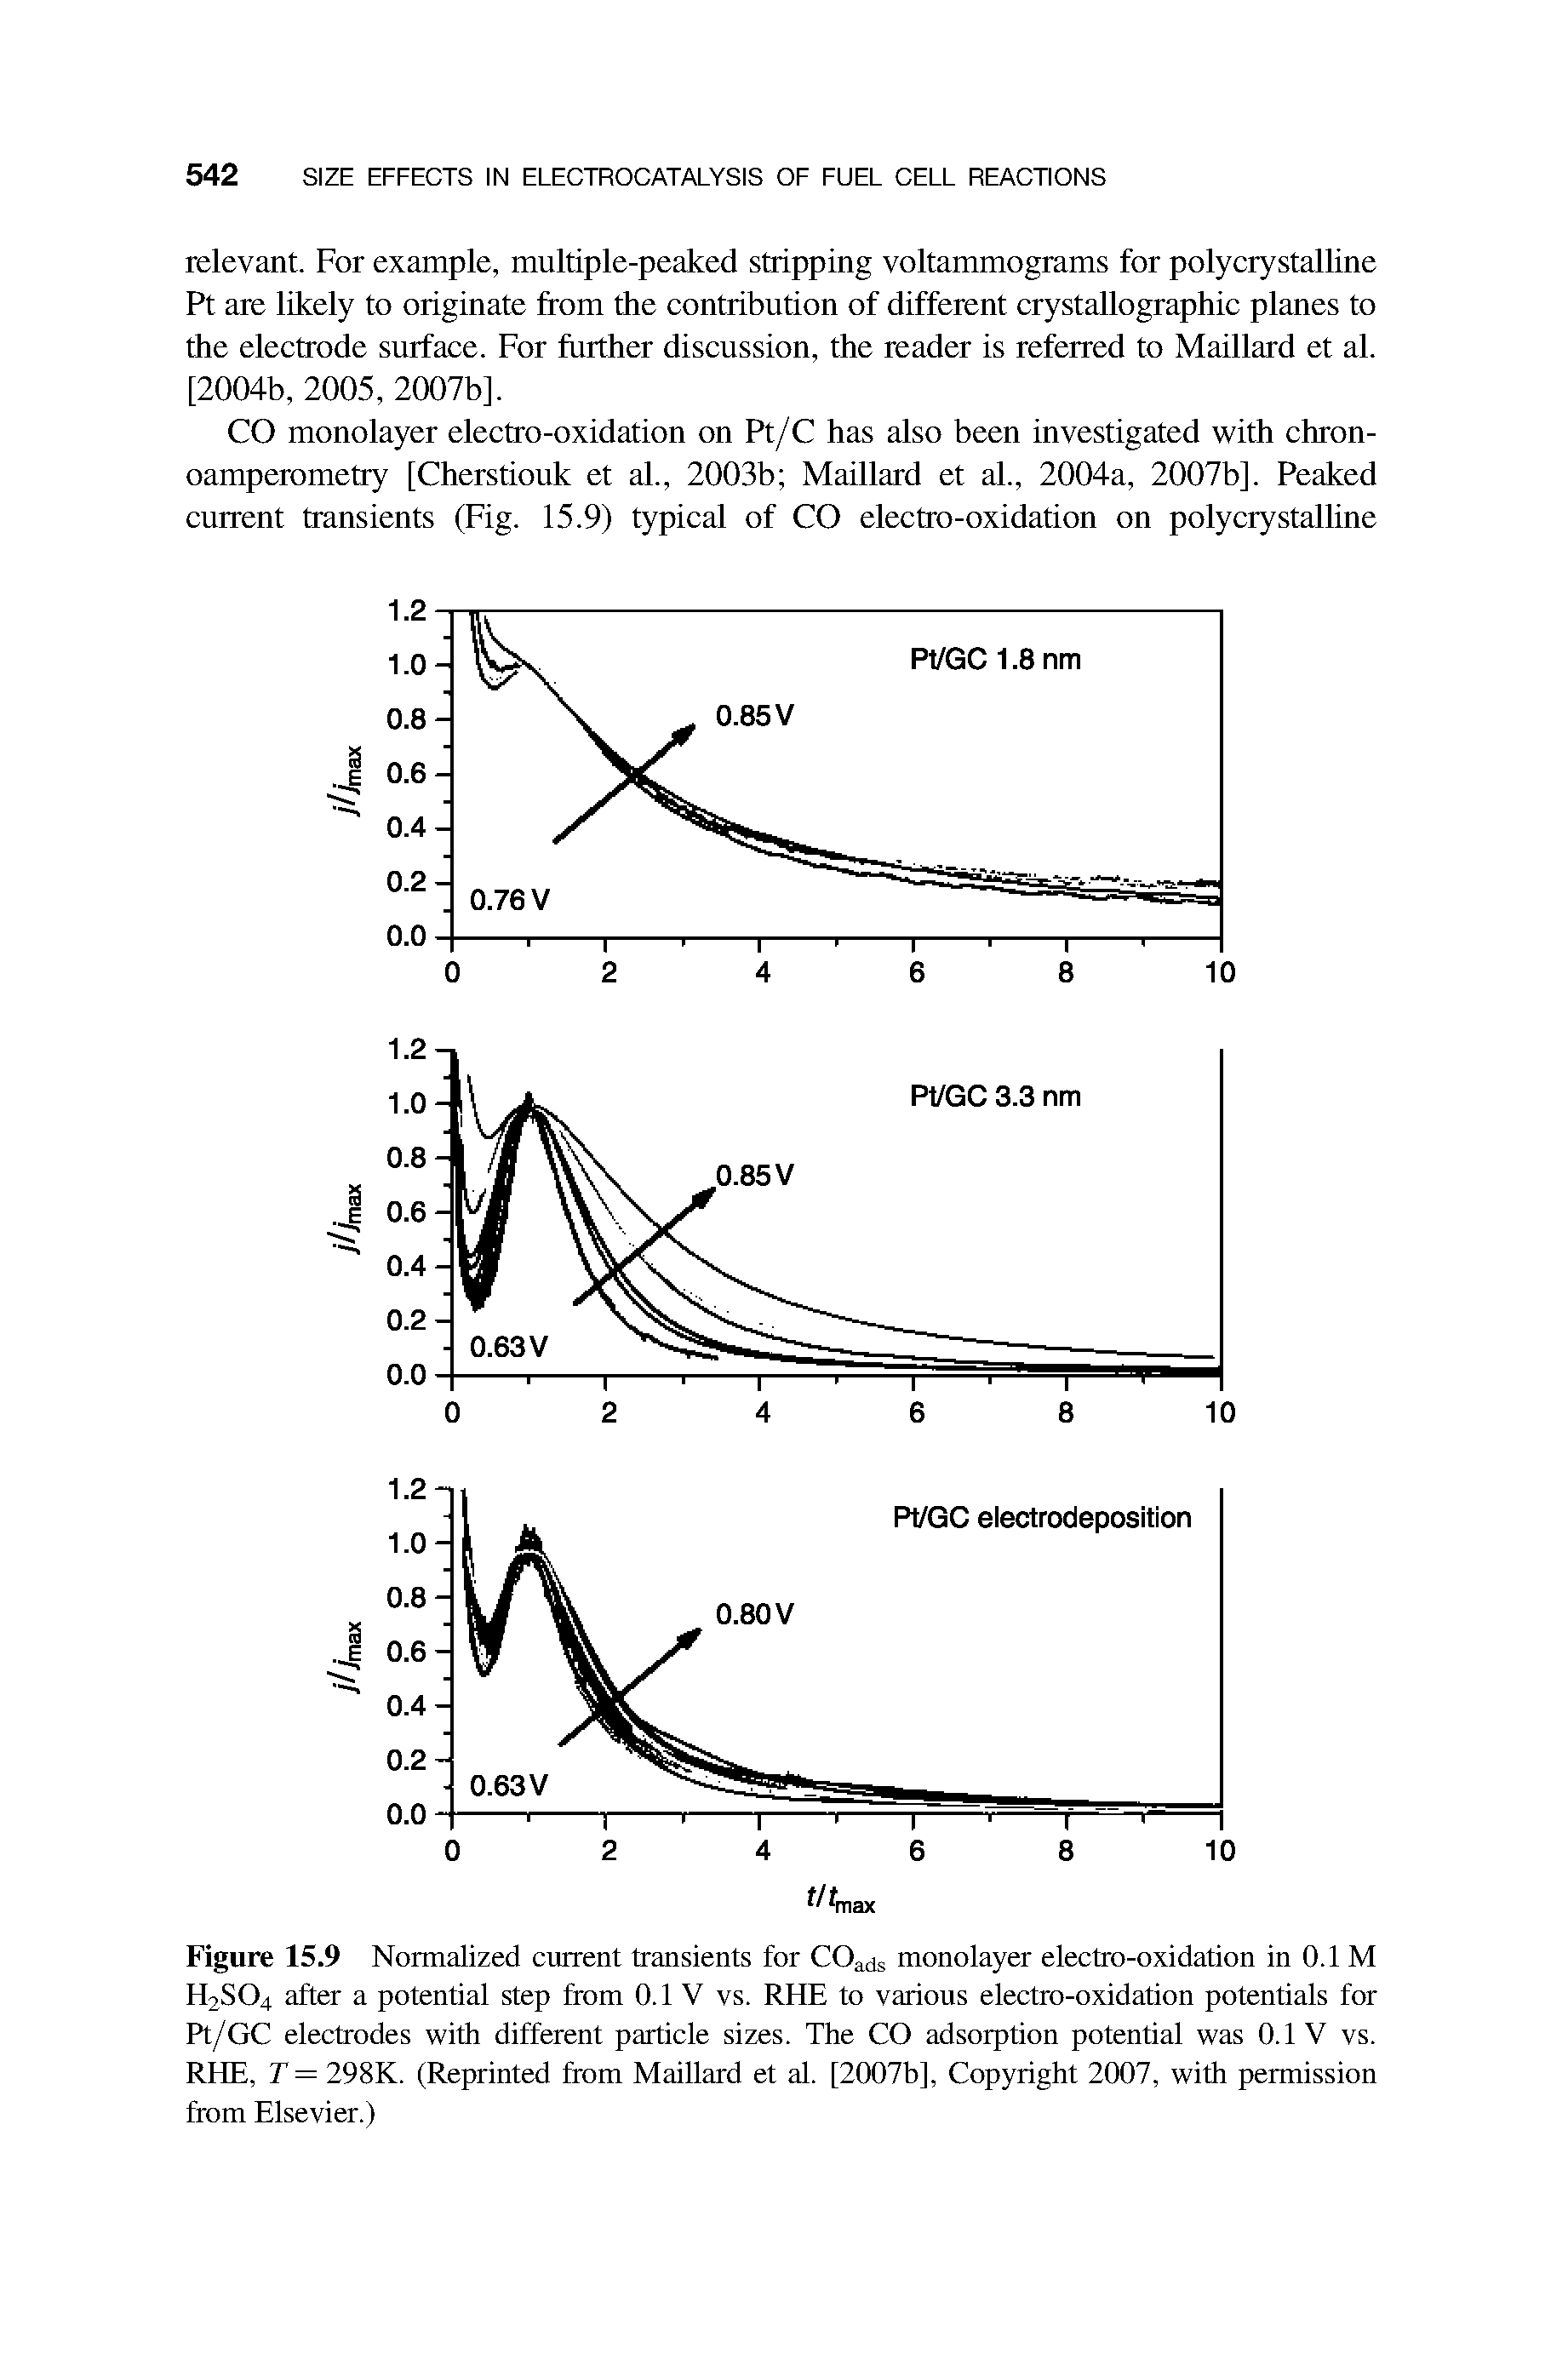 Figure 15.9 Normalized current transients for COads monolayer electro-oxidation in 0.1 M H2SO4 after a potential step from 0.1 V vs. RHE to various electro-oxidation potentials for Pt/GC electrodes with different particle sizes. The CO adsorption potential was 0.1 V vs. RHE, T = 298K. (Reprinted from Maillard et al. [2007b], Copyright 2007, with permission from Elsevier.)...